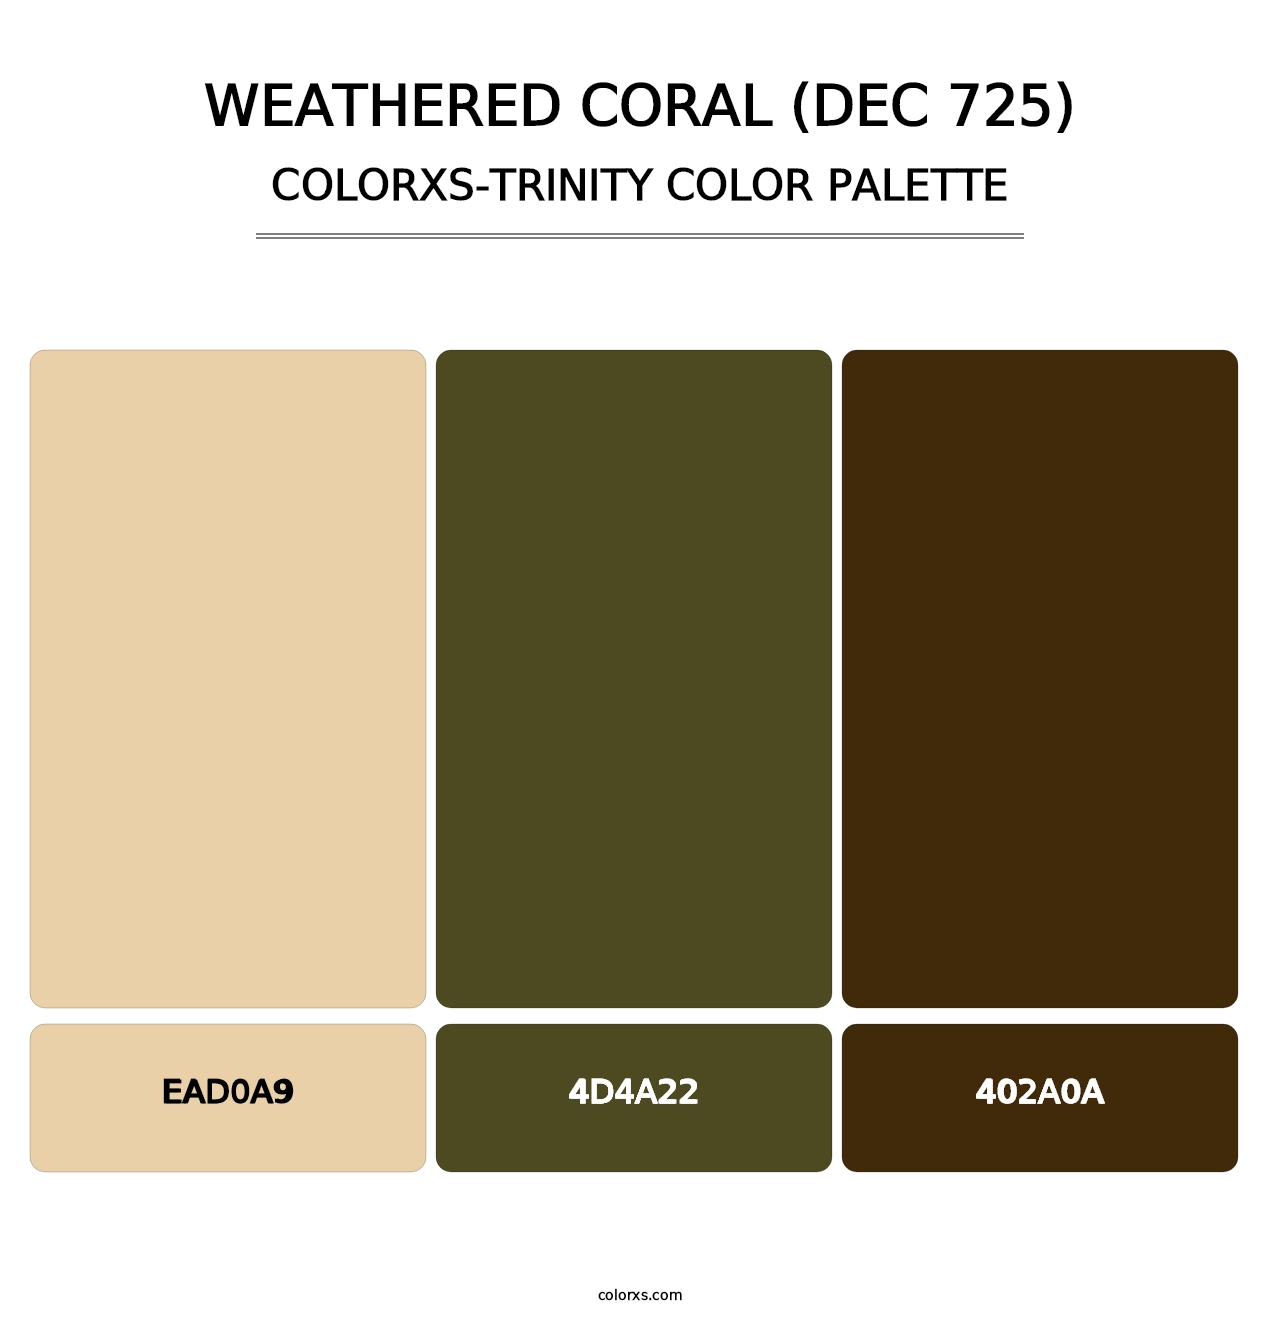 Weathered Coral (DEC 725) - Colorxs Trinity Palette